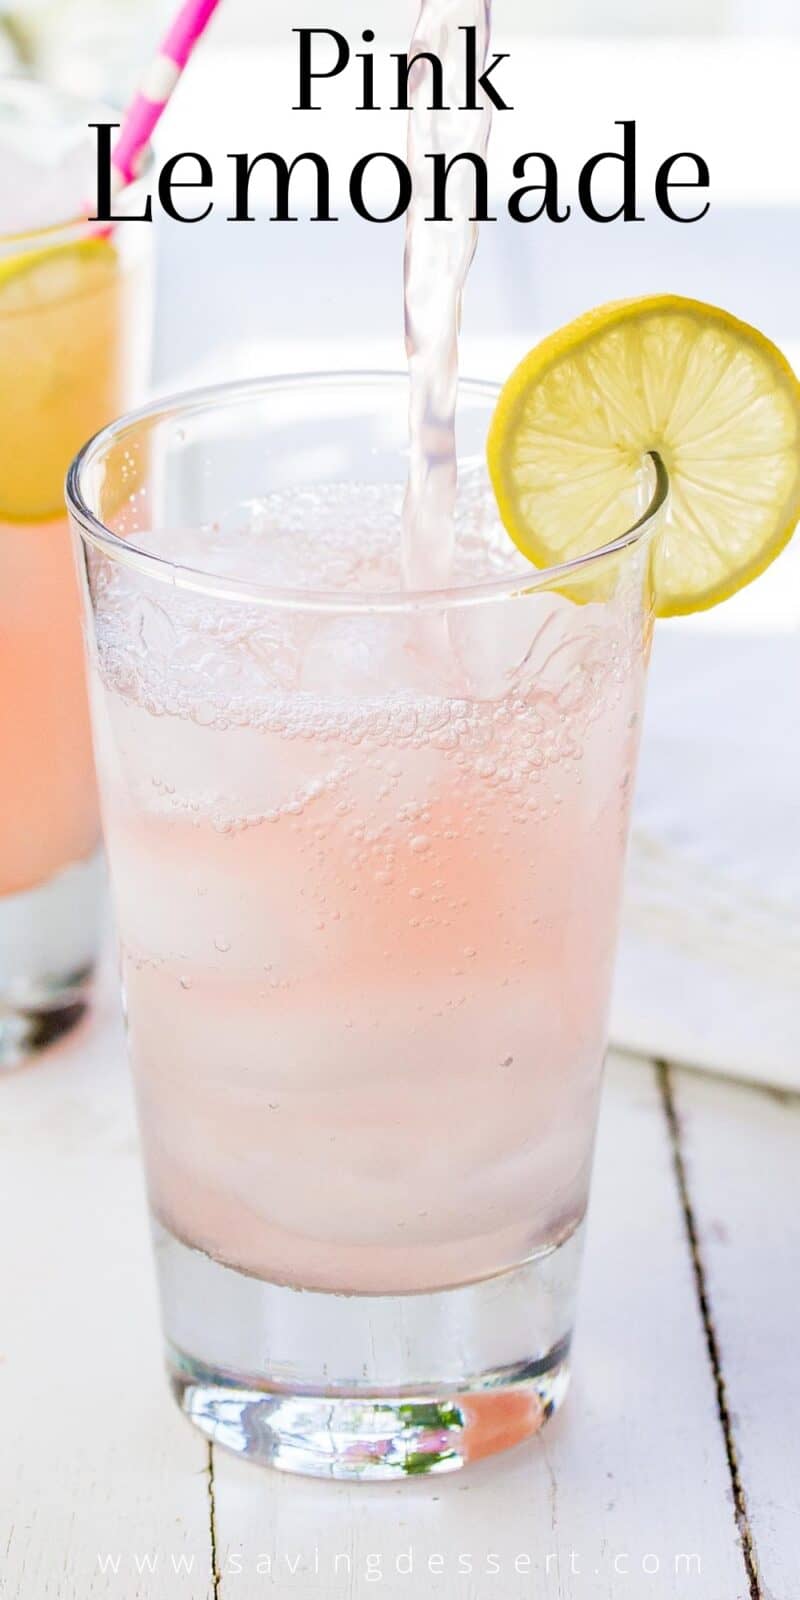 A tall glass being filled with homemade pink lemonade garnished with a slice of lemon